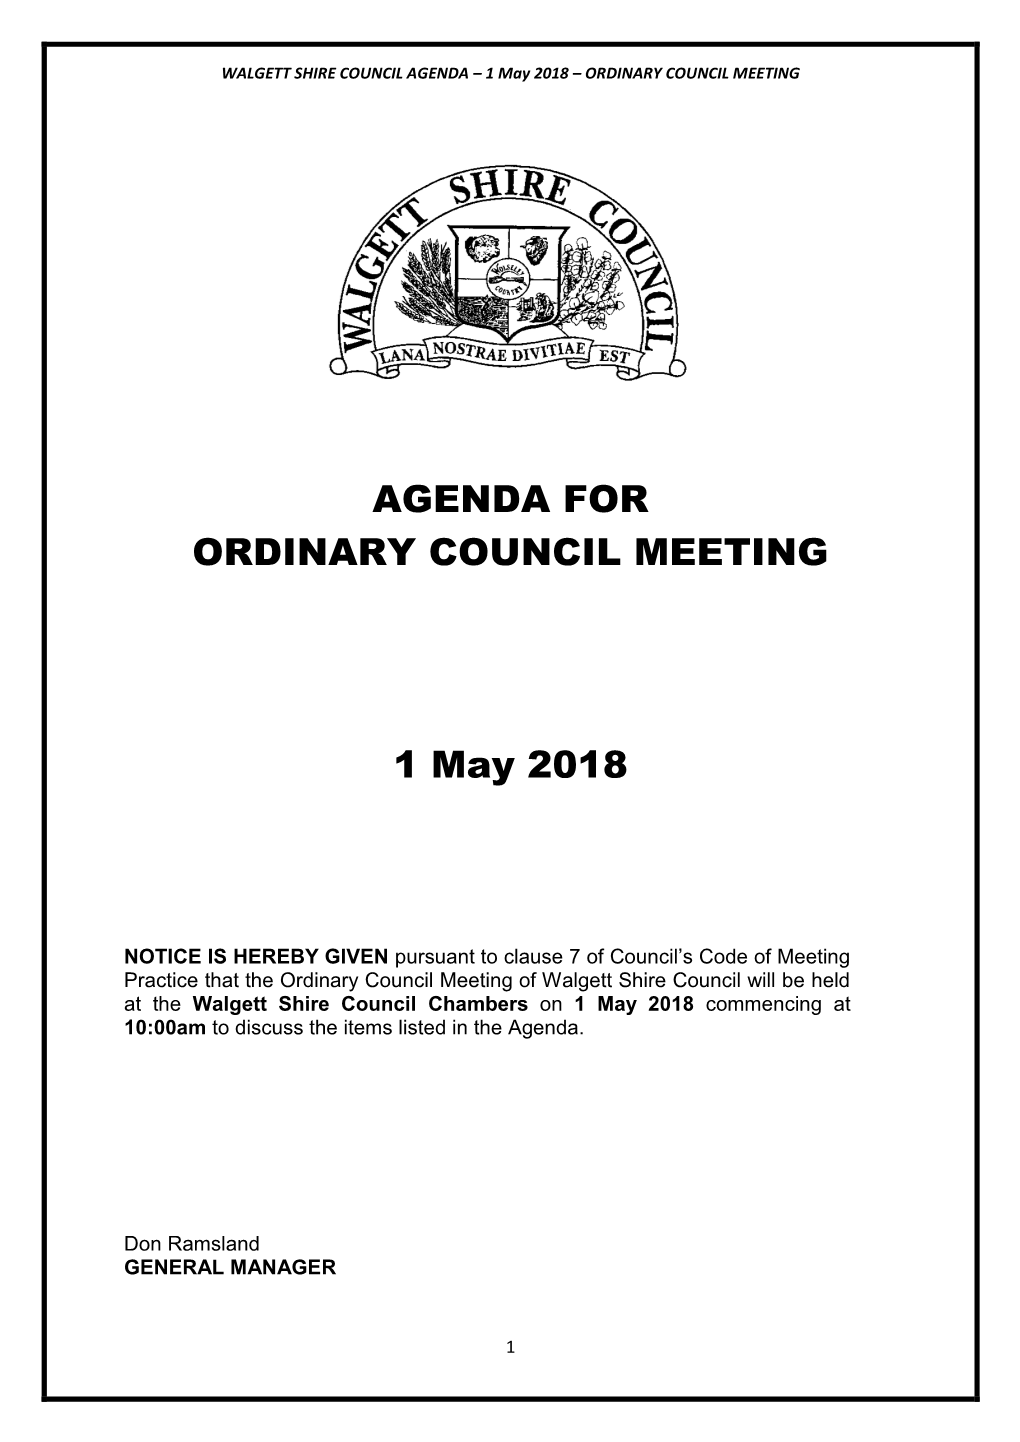 AGENDA for ORDINARY COUNCIL MEETING 1 May 2018